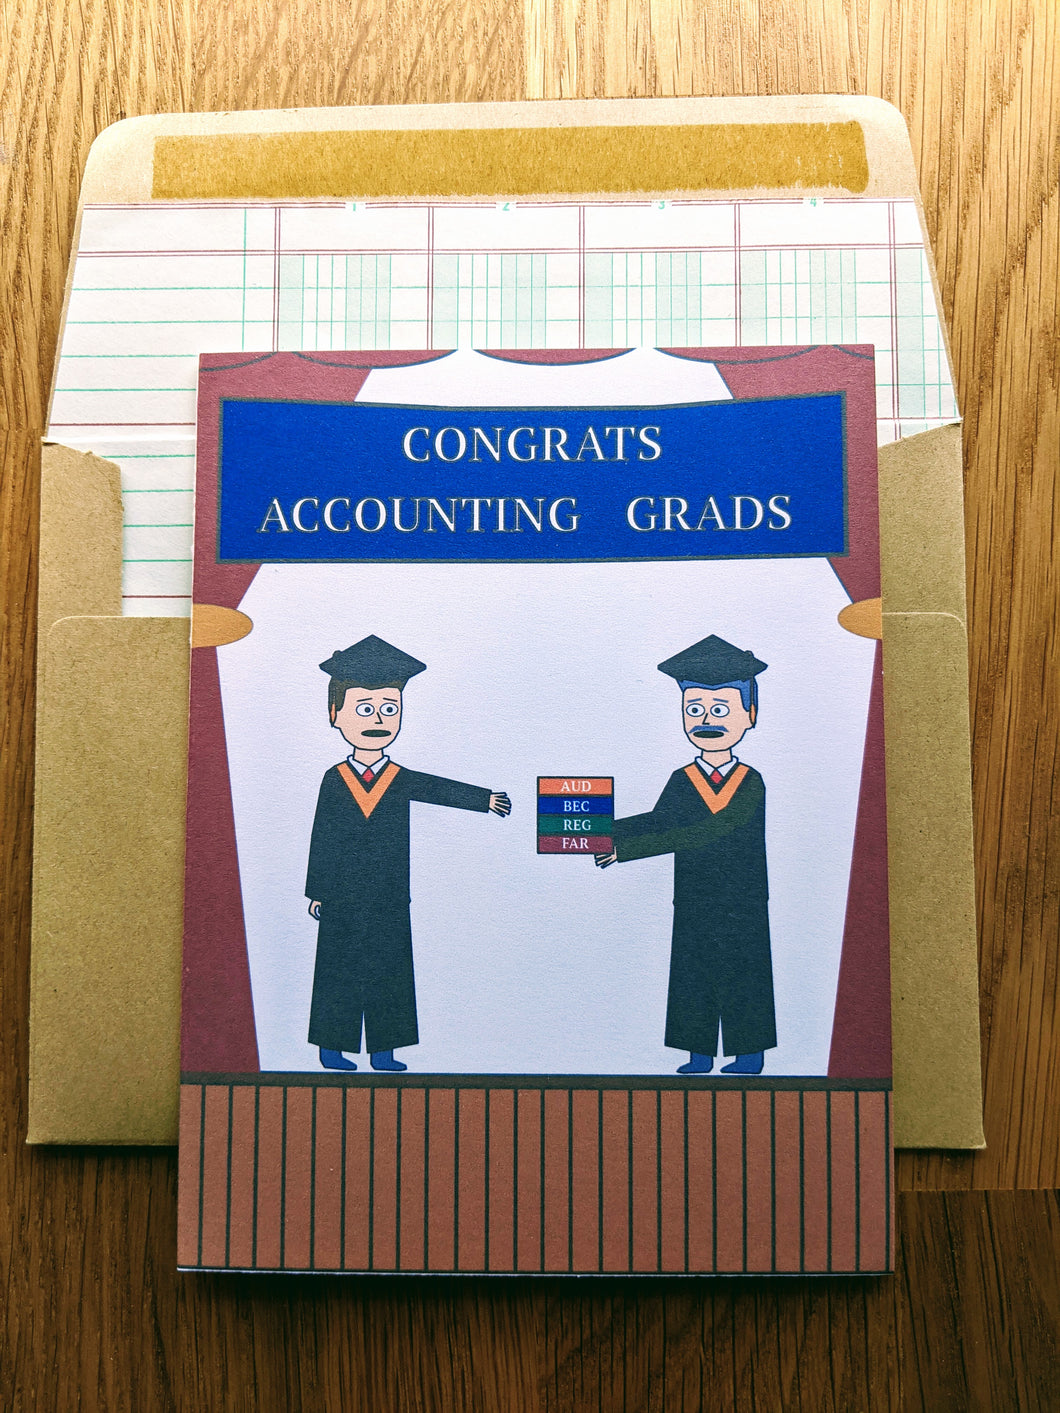 Accounting greeting card, with images of a graduation stage with a graduate in cap and gown walking towards a professor in cap and gown, being handed a stack of four CPA Exam review books, with text on a banner that reads 